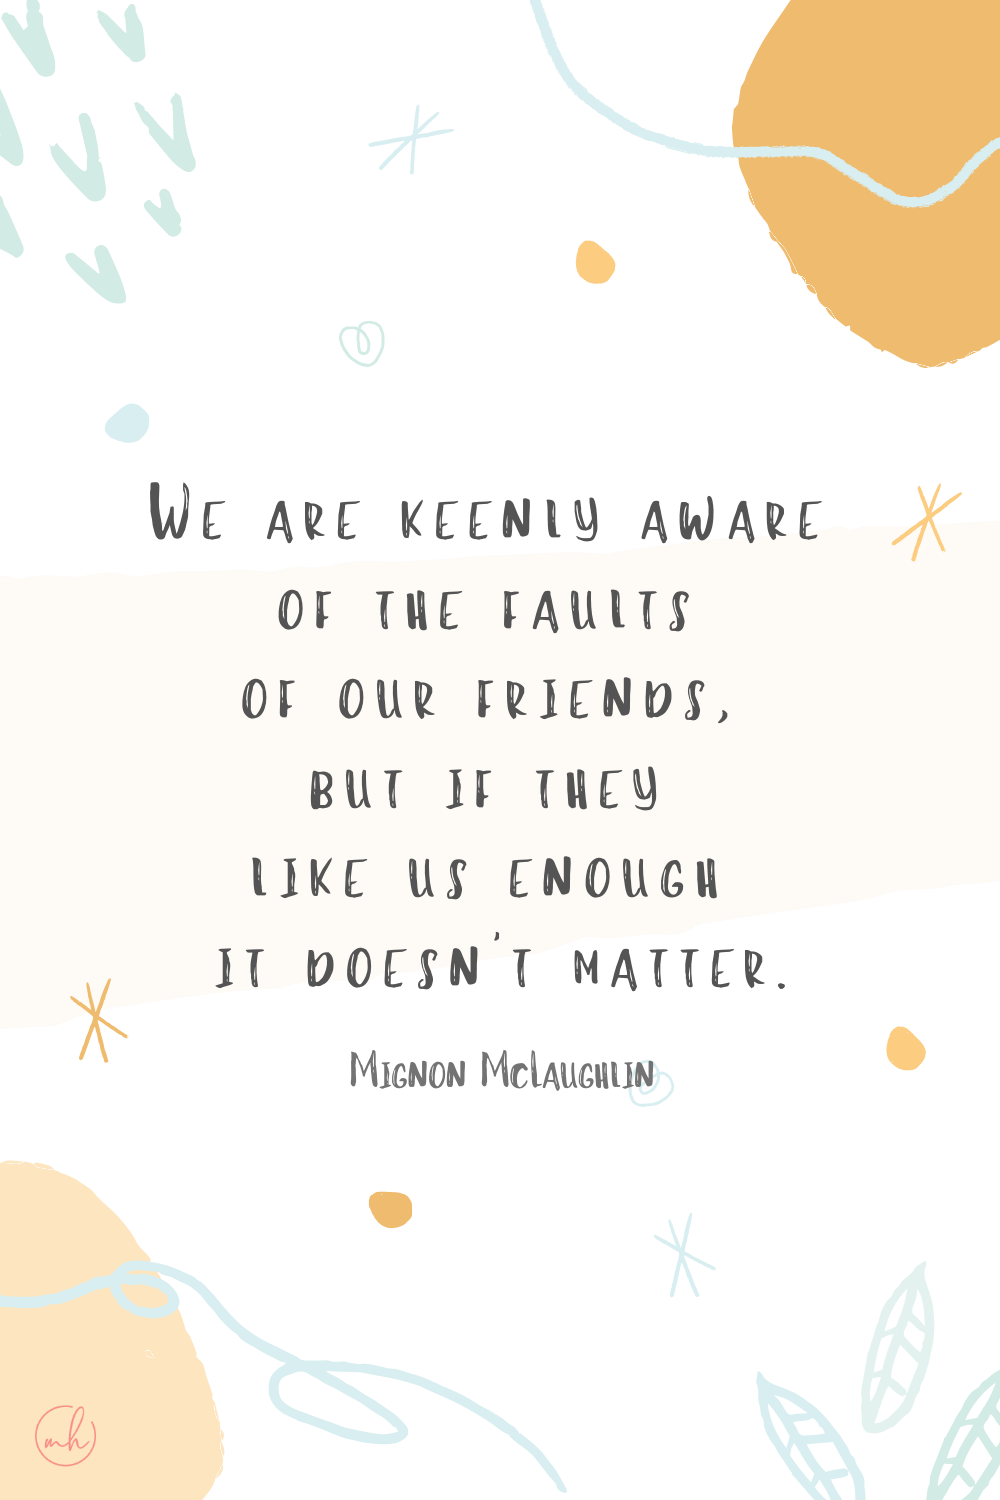 “We are keenly aware of the faults of our friends, but if they like us enough it doesn’t matter.” - Mignon McLaughlin